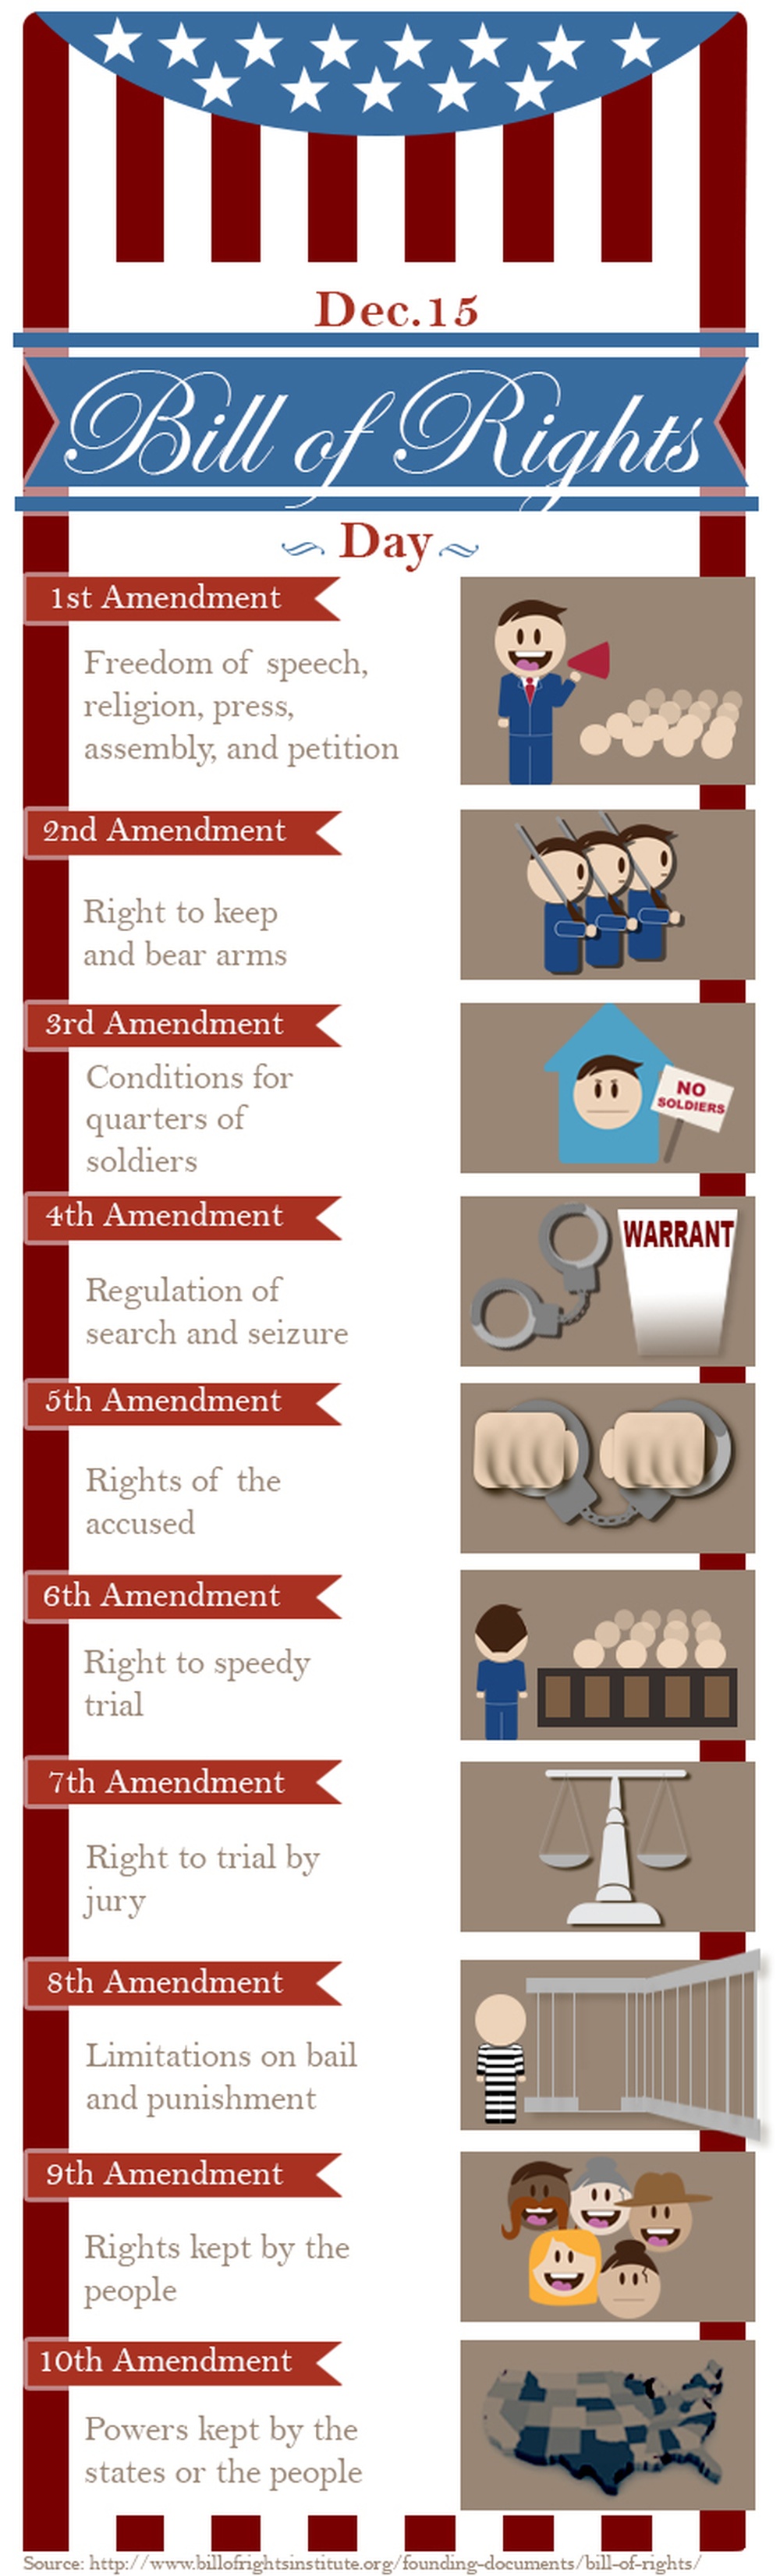 Bill of Rights Day Info Graphic